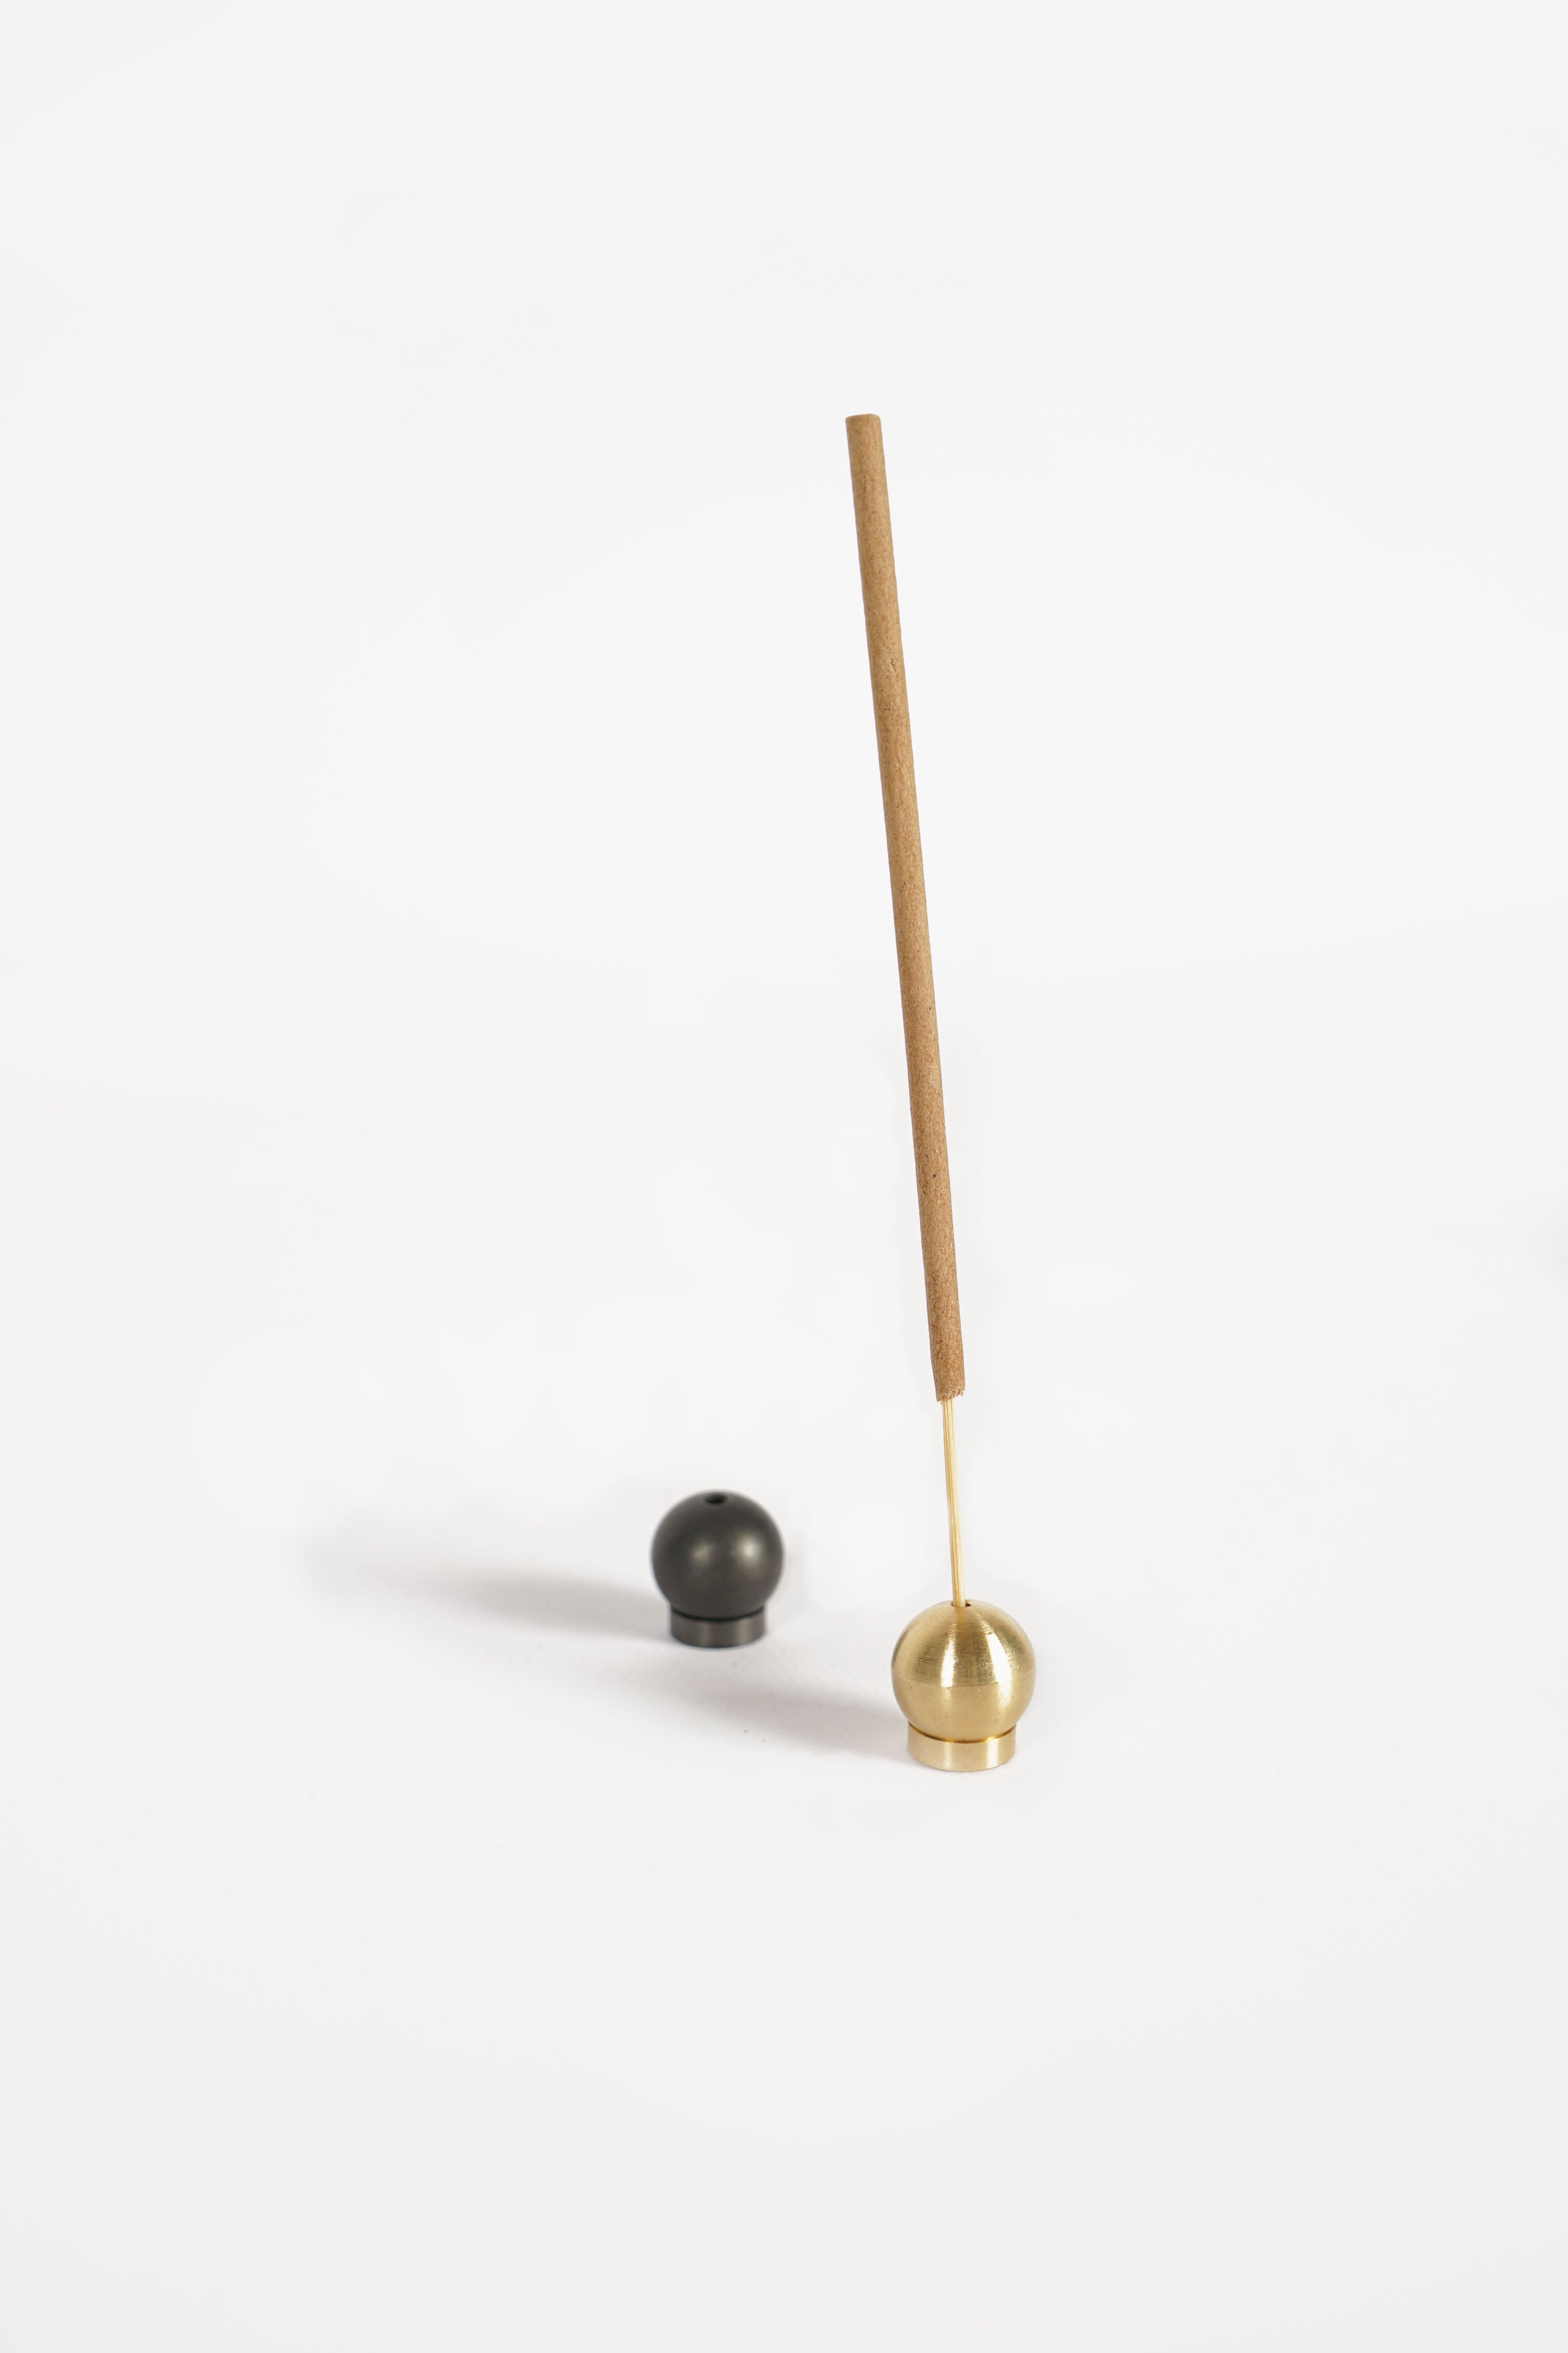 Incense Stand / Sphere